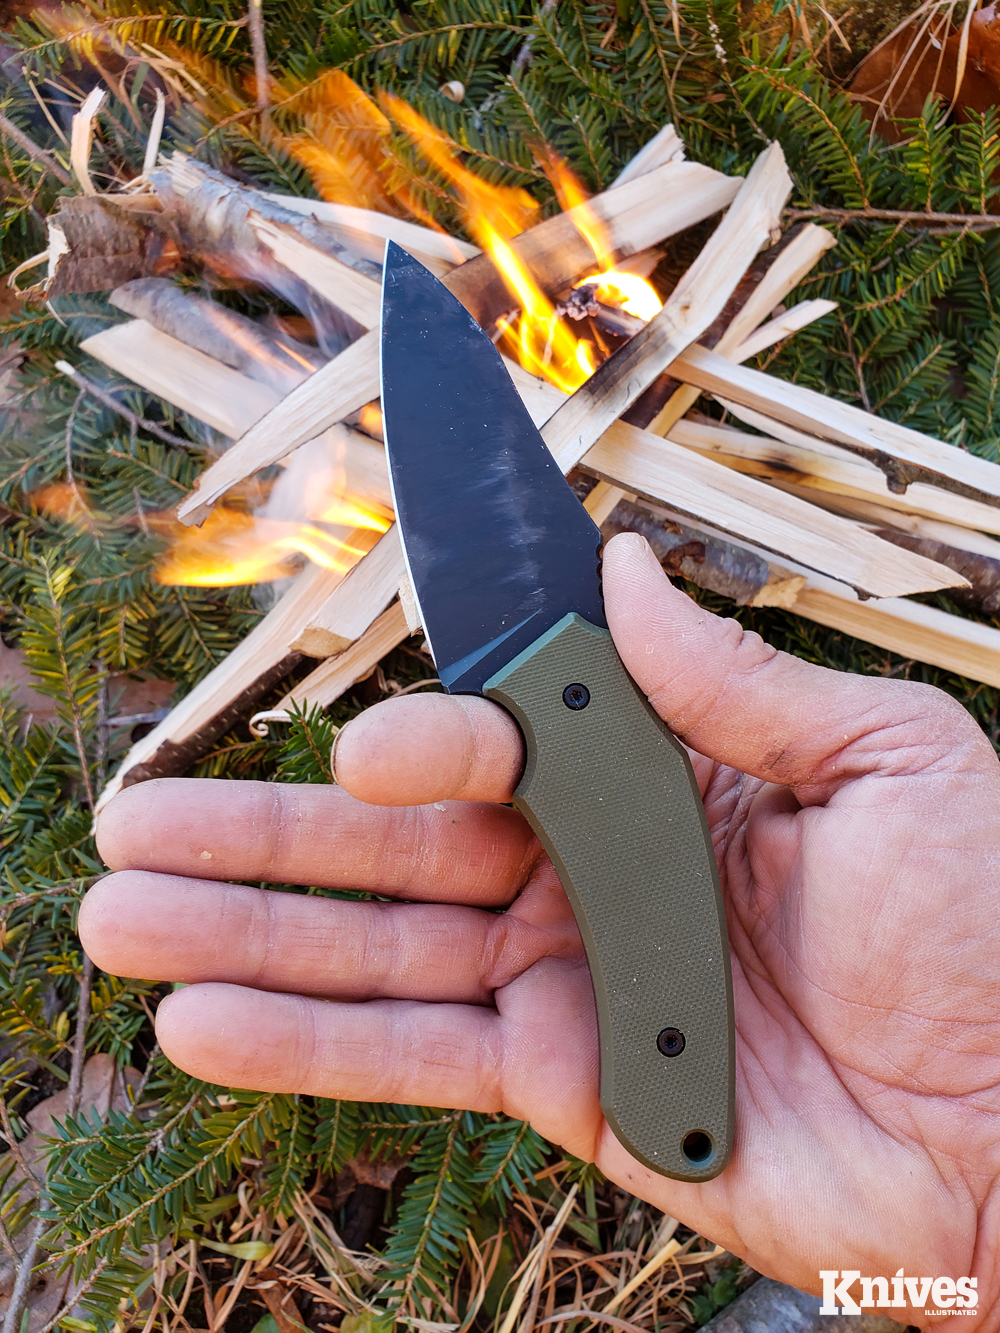 The index finger radius and thumb relief make for an exceptionally comfortable knife in hand.